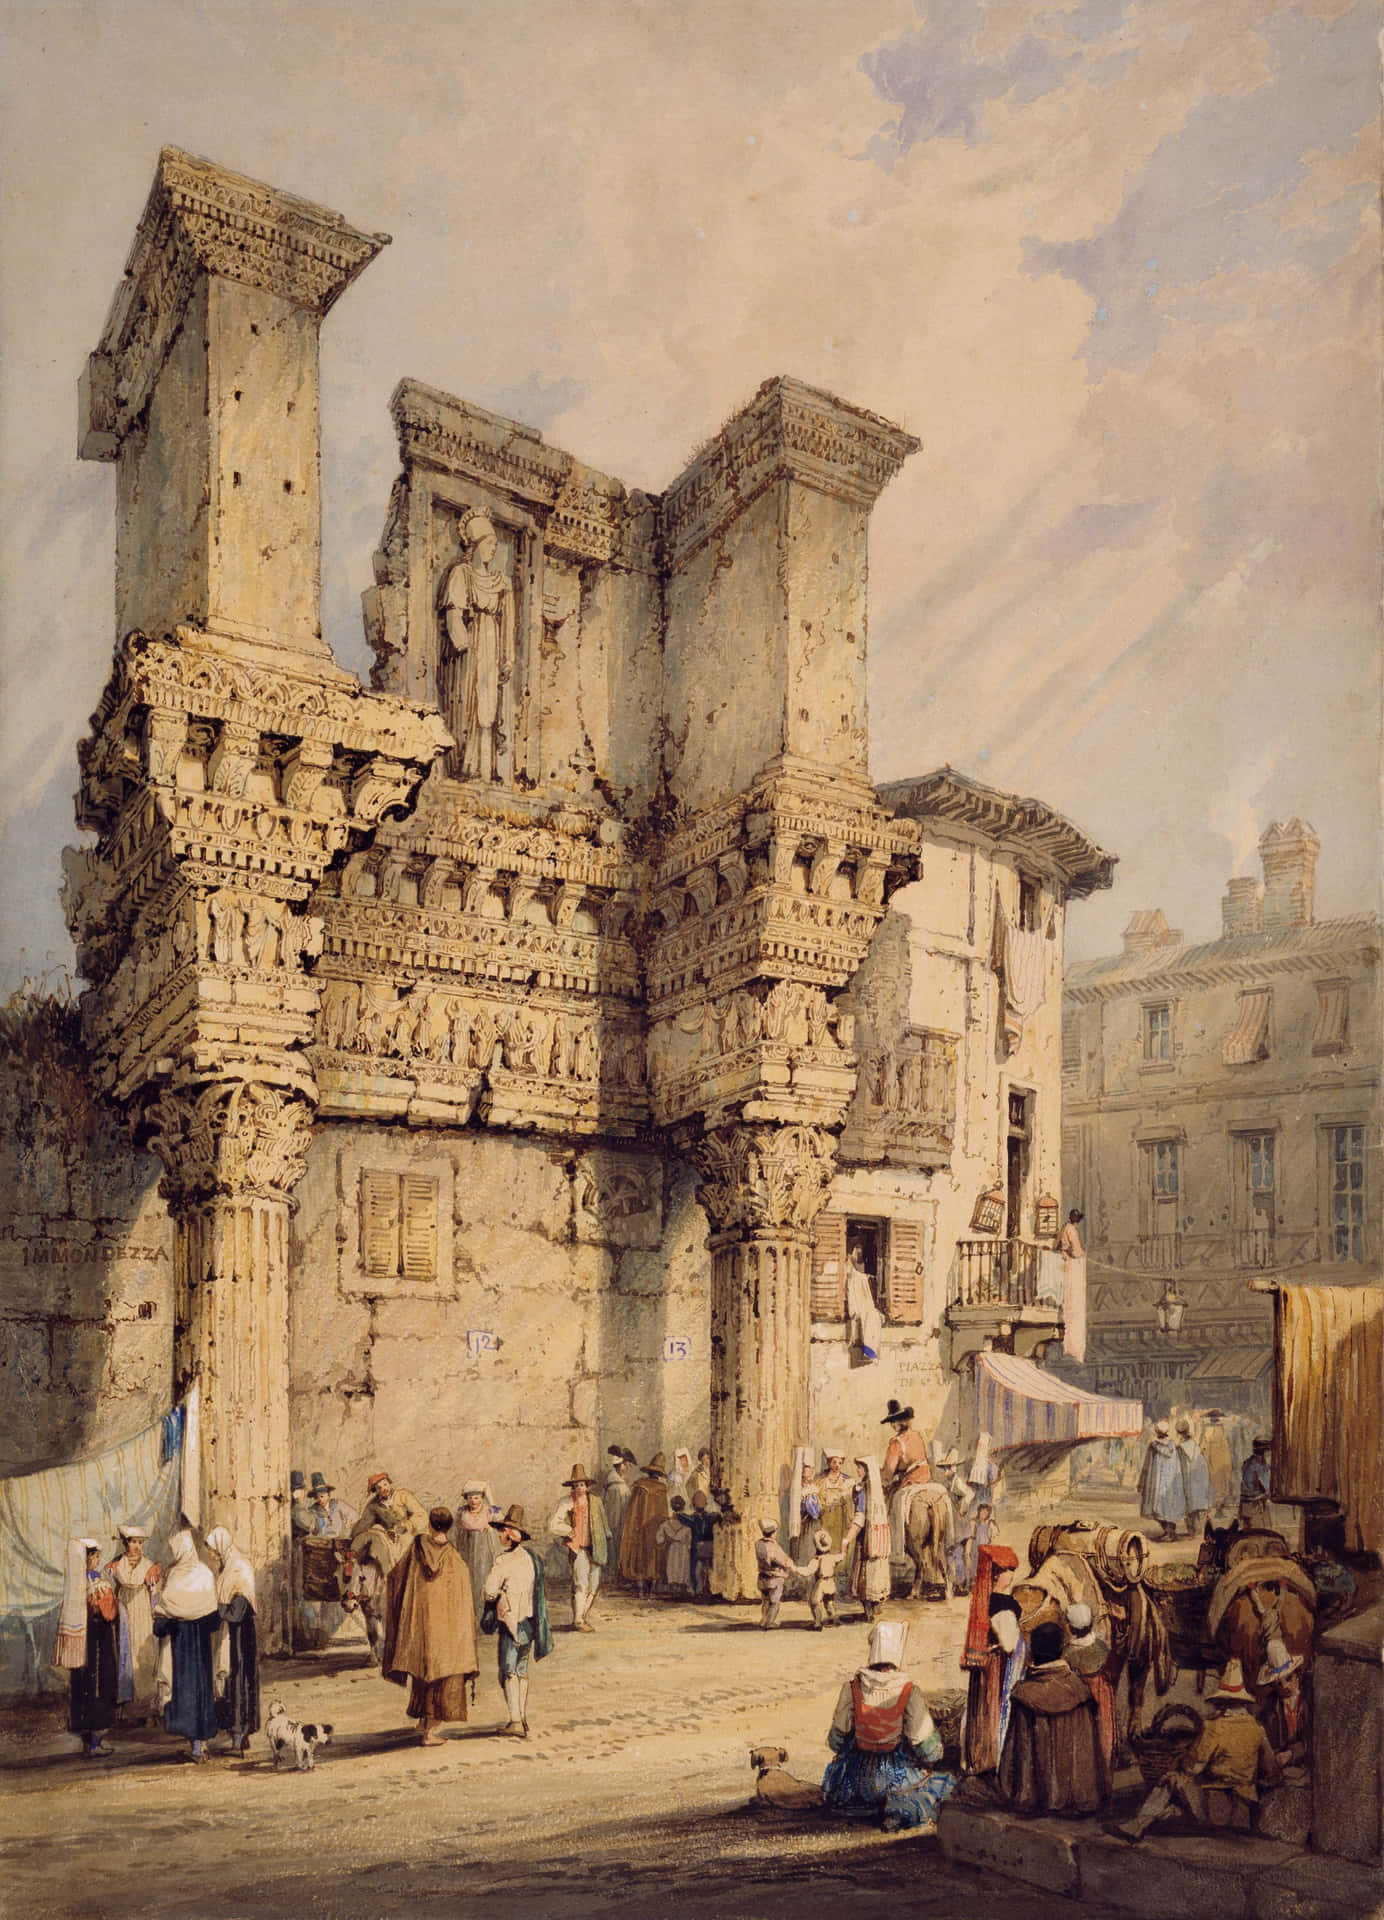 A Painting Of A Building With People Wallpaper